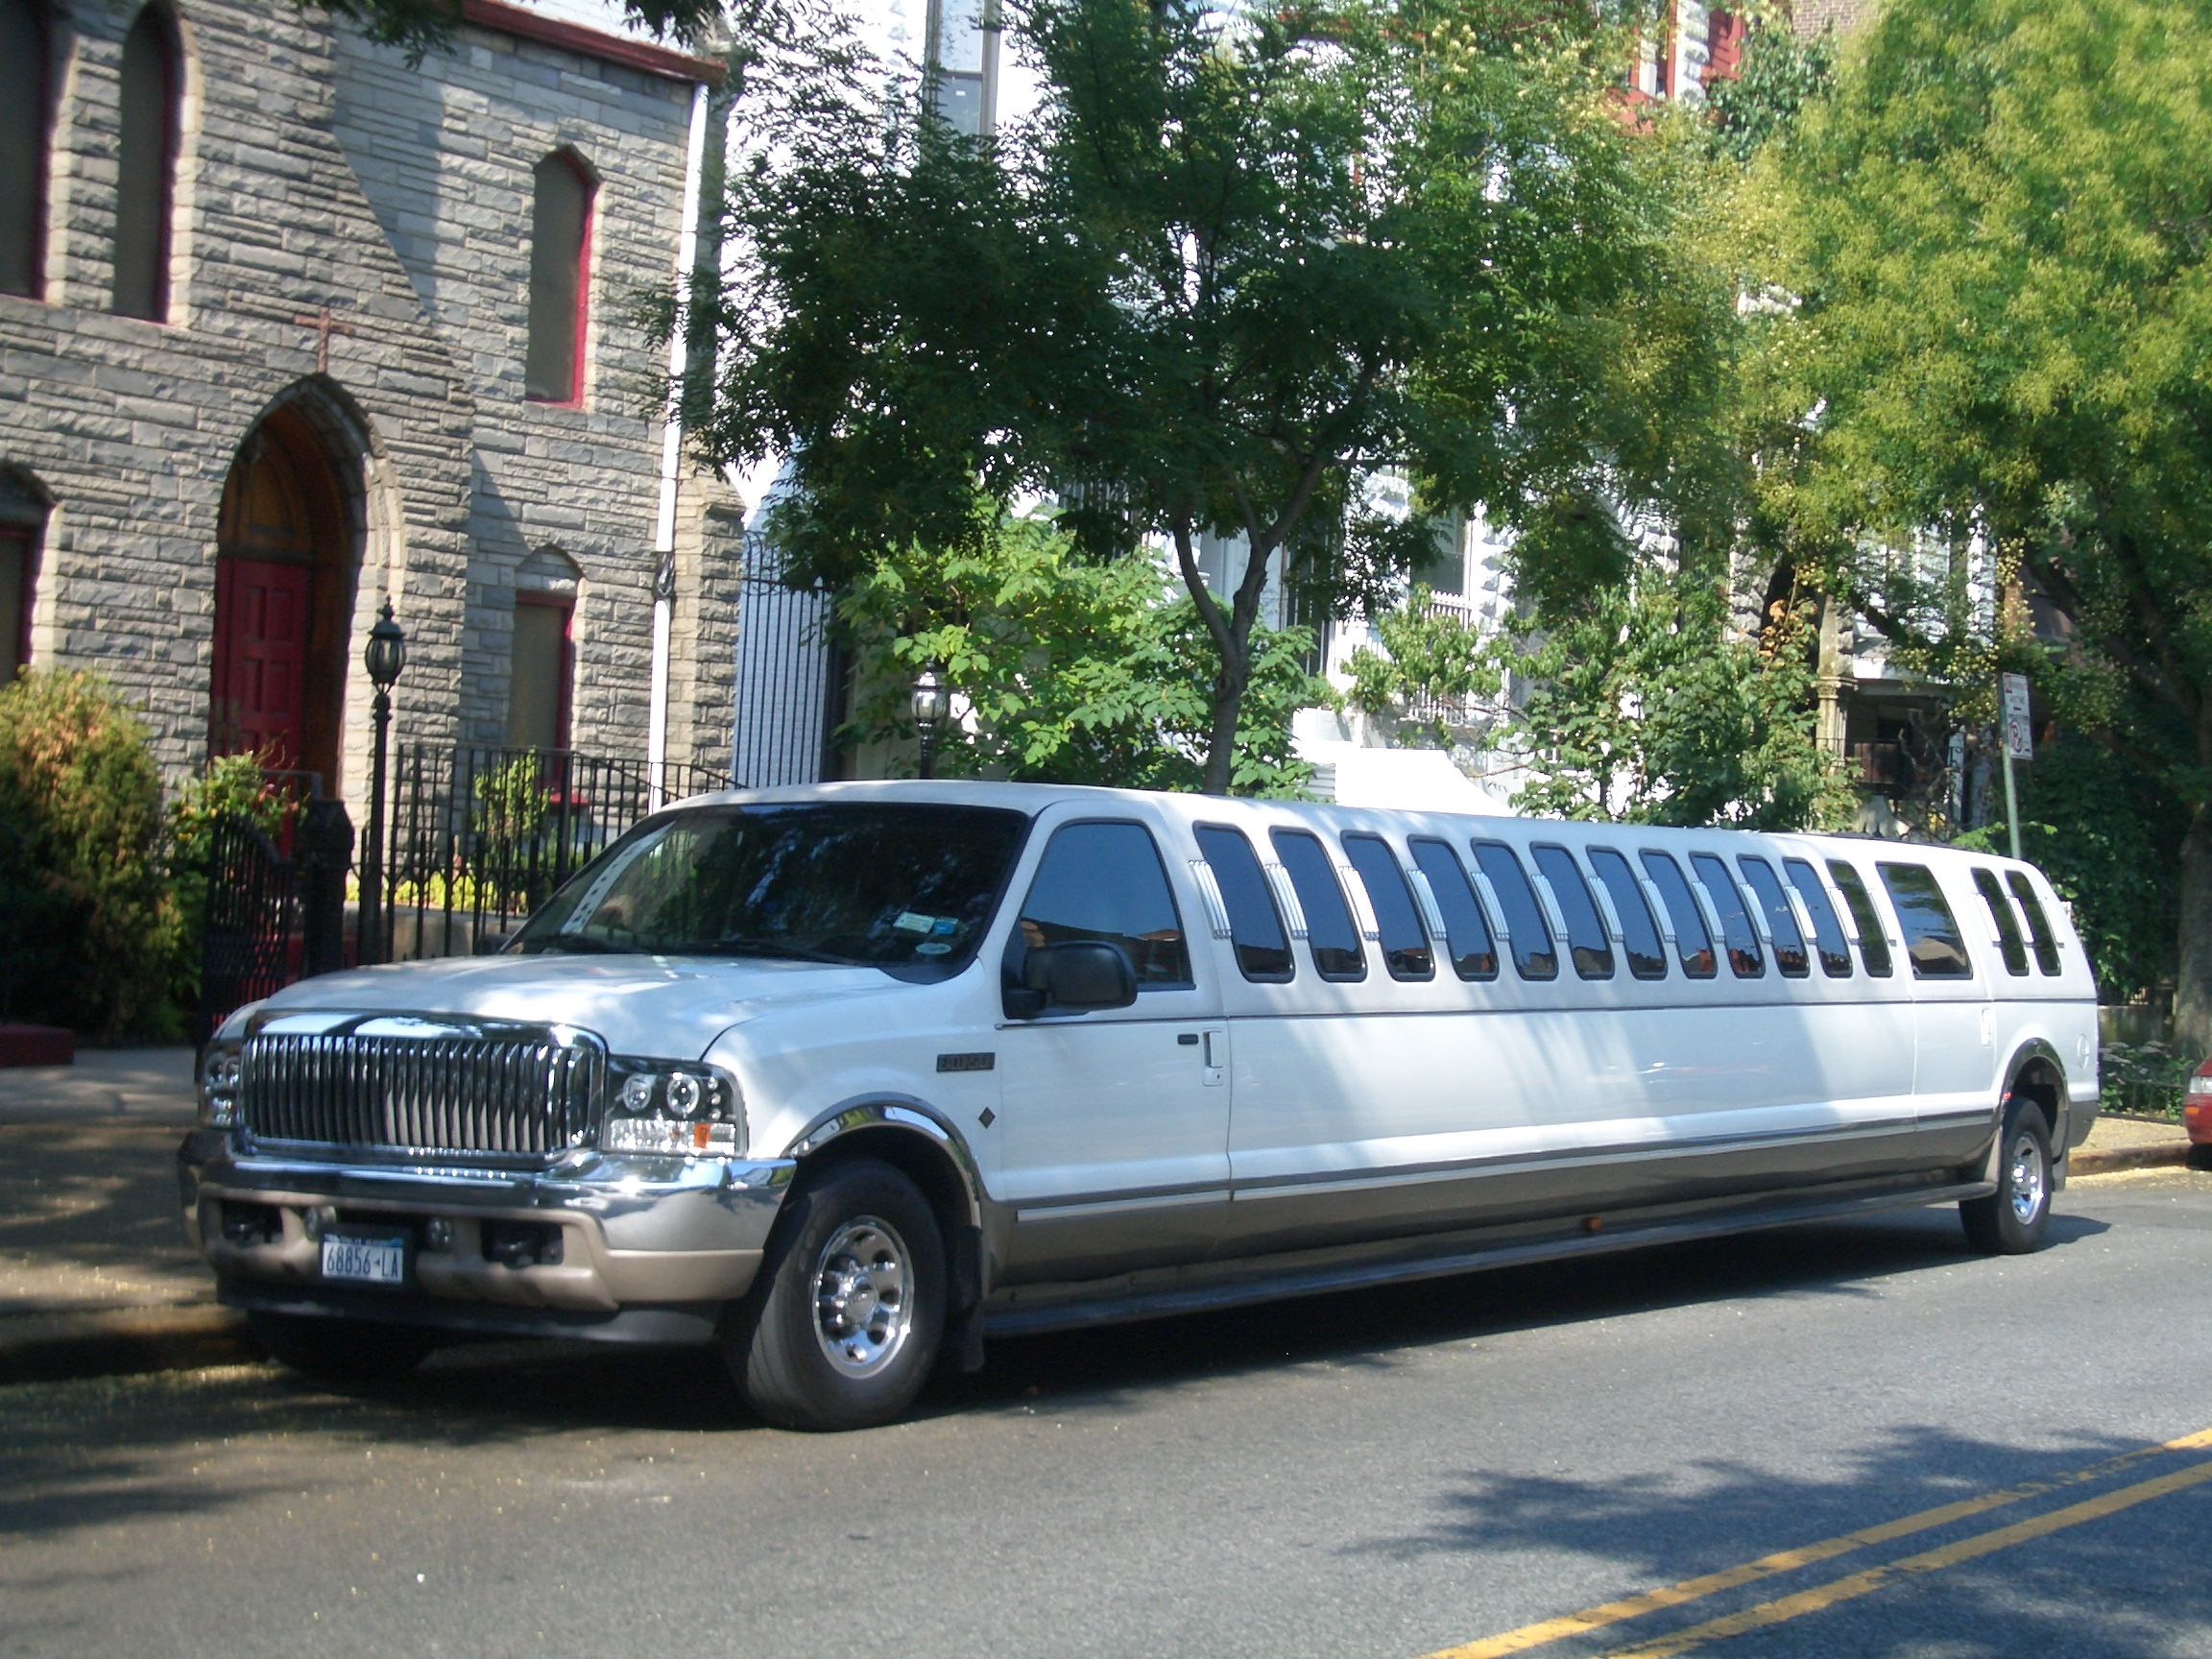 This Excursion limousine is the ultimate in luxury and convenience ...